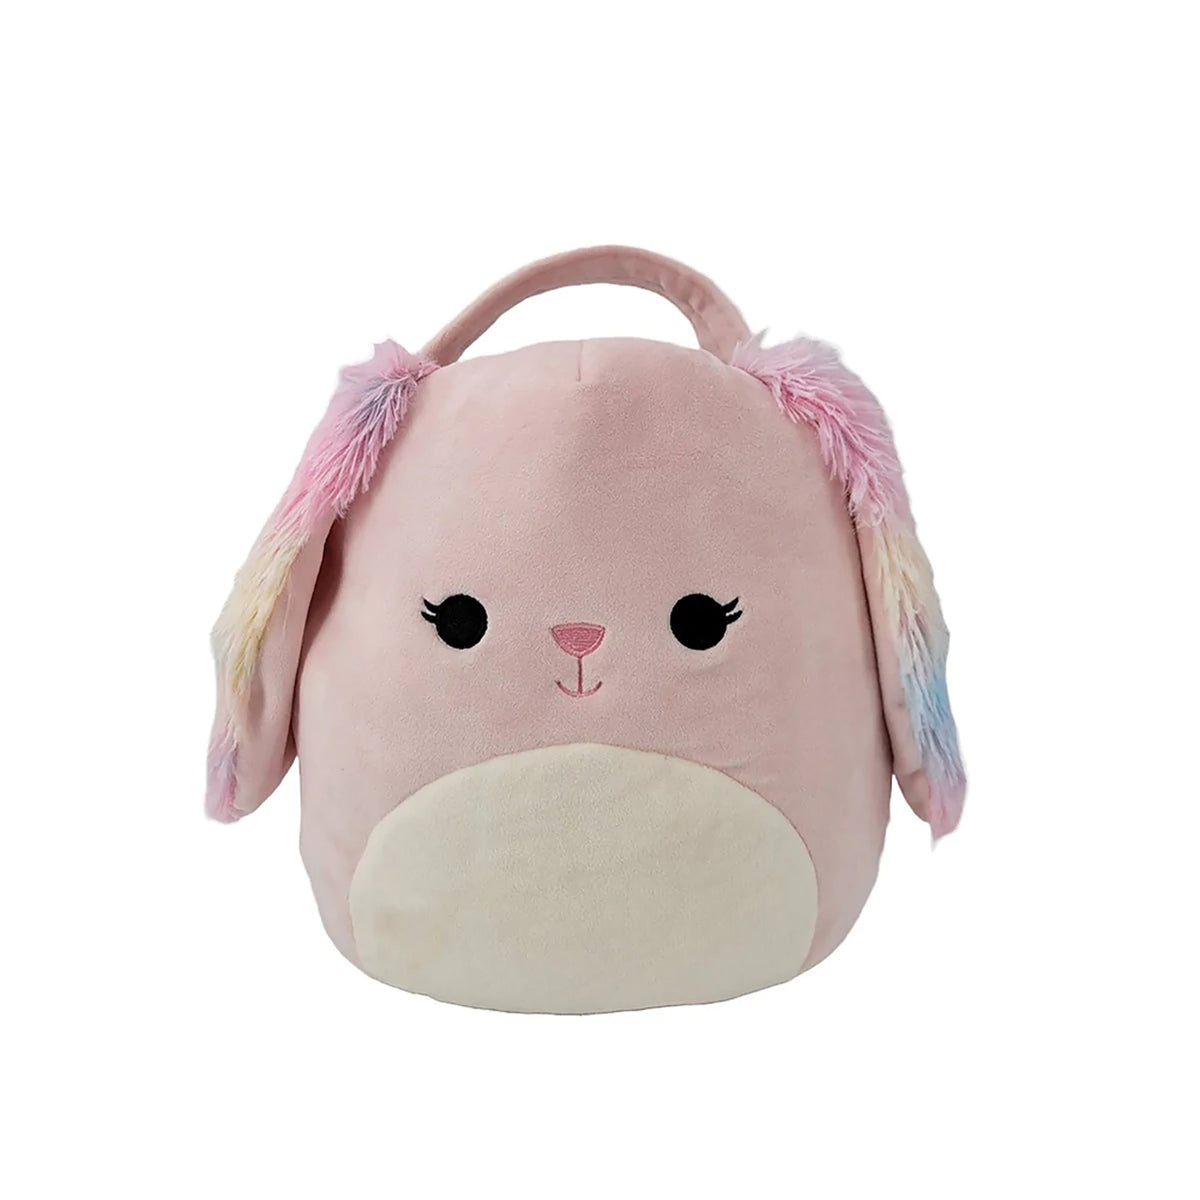 KROEGER Easter Squishmallow Bop Easter Basket, 10 Inches, 1 Count